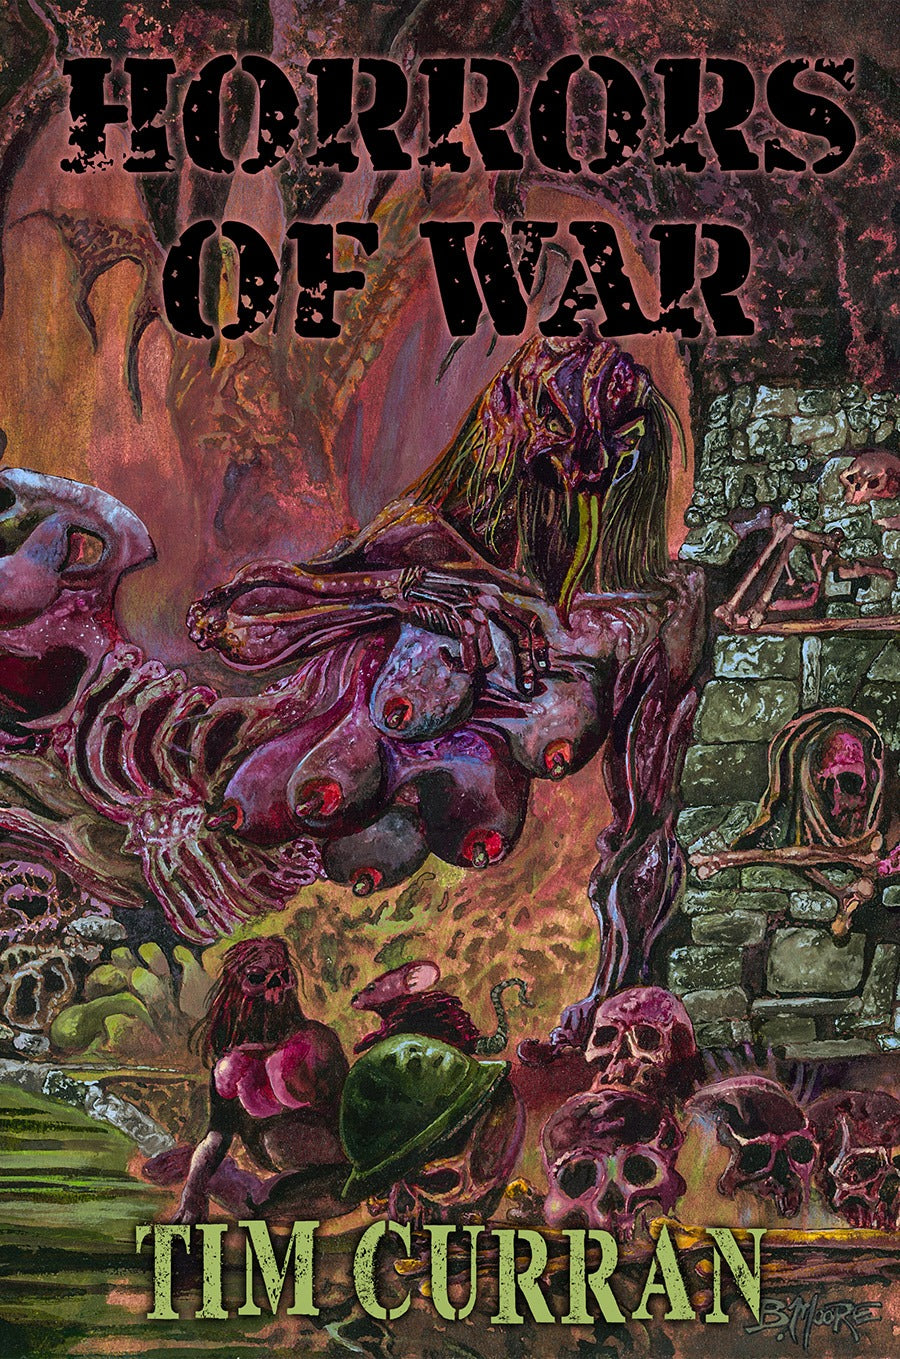 Horrors of War by Tim Curran Signed Numbered Limited Edition Hardcover